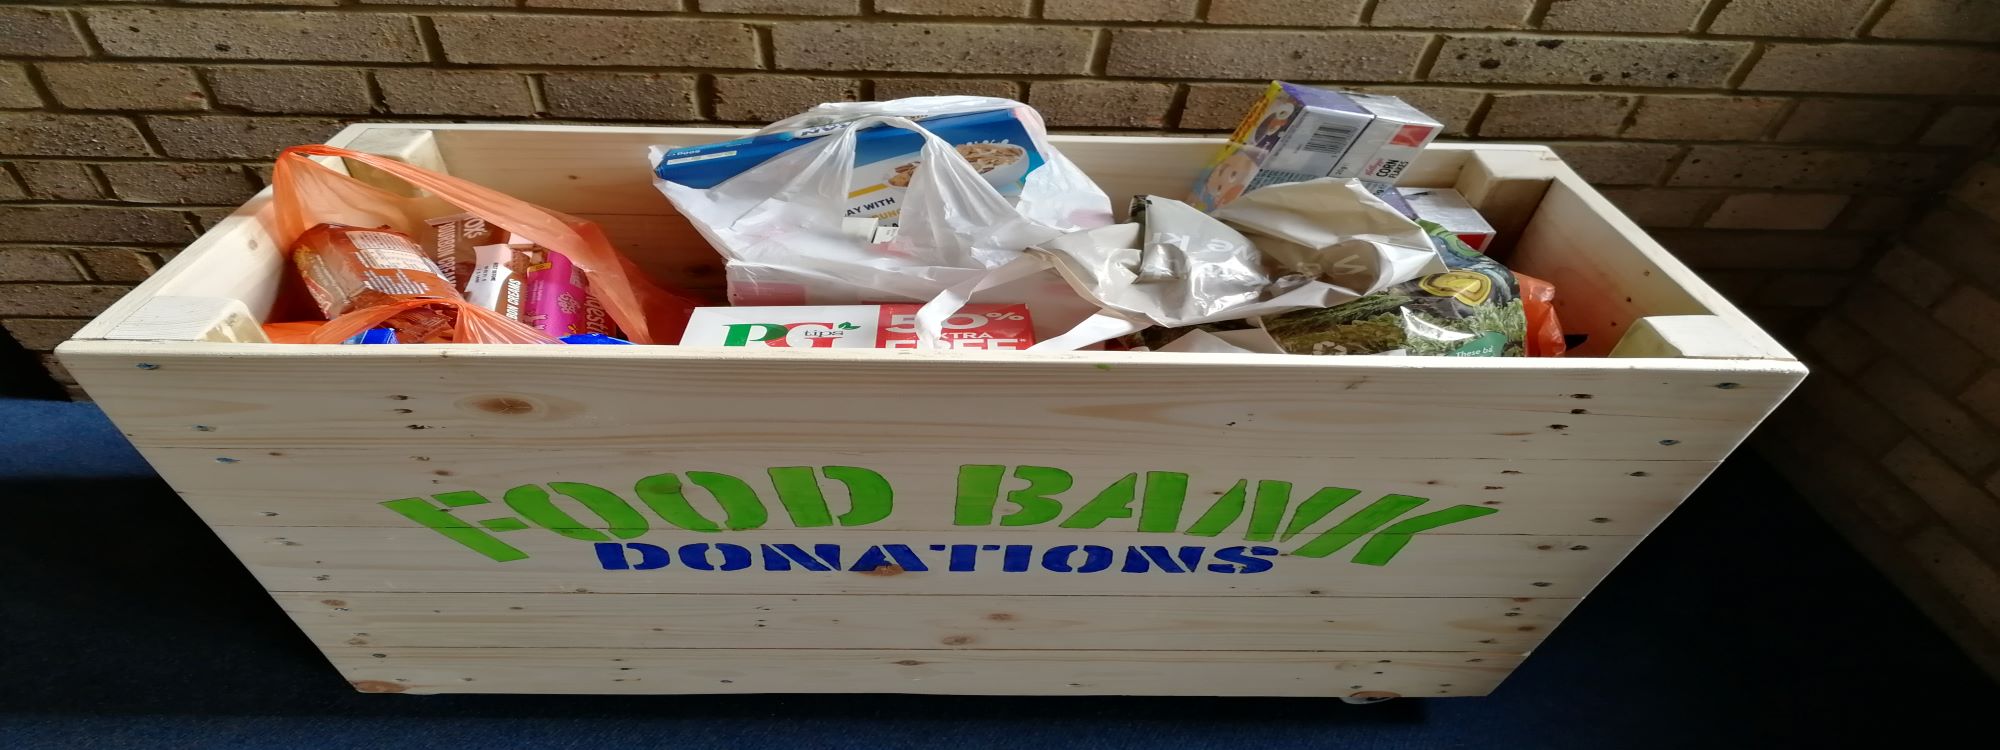 SOUTHEND FOODBANK* Eastwood Baptist Church is now a Distribution Centre for the Southend Foodbank, open every Wednesday 09:30 - 11:00*Find out more